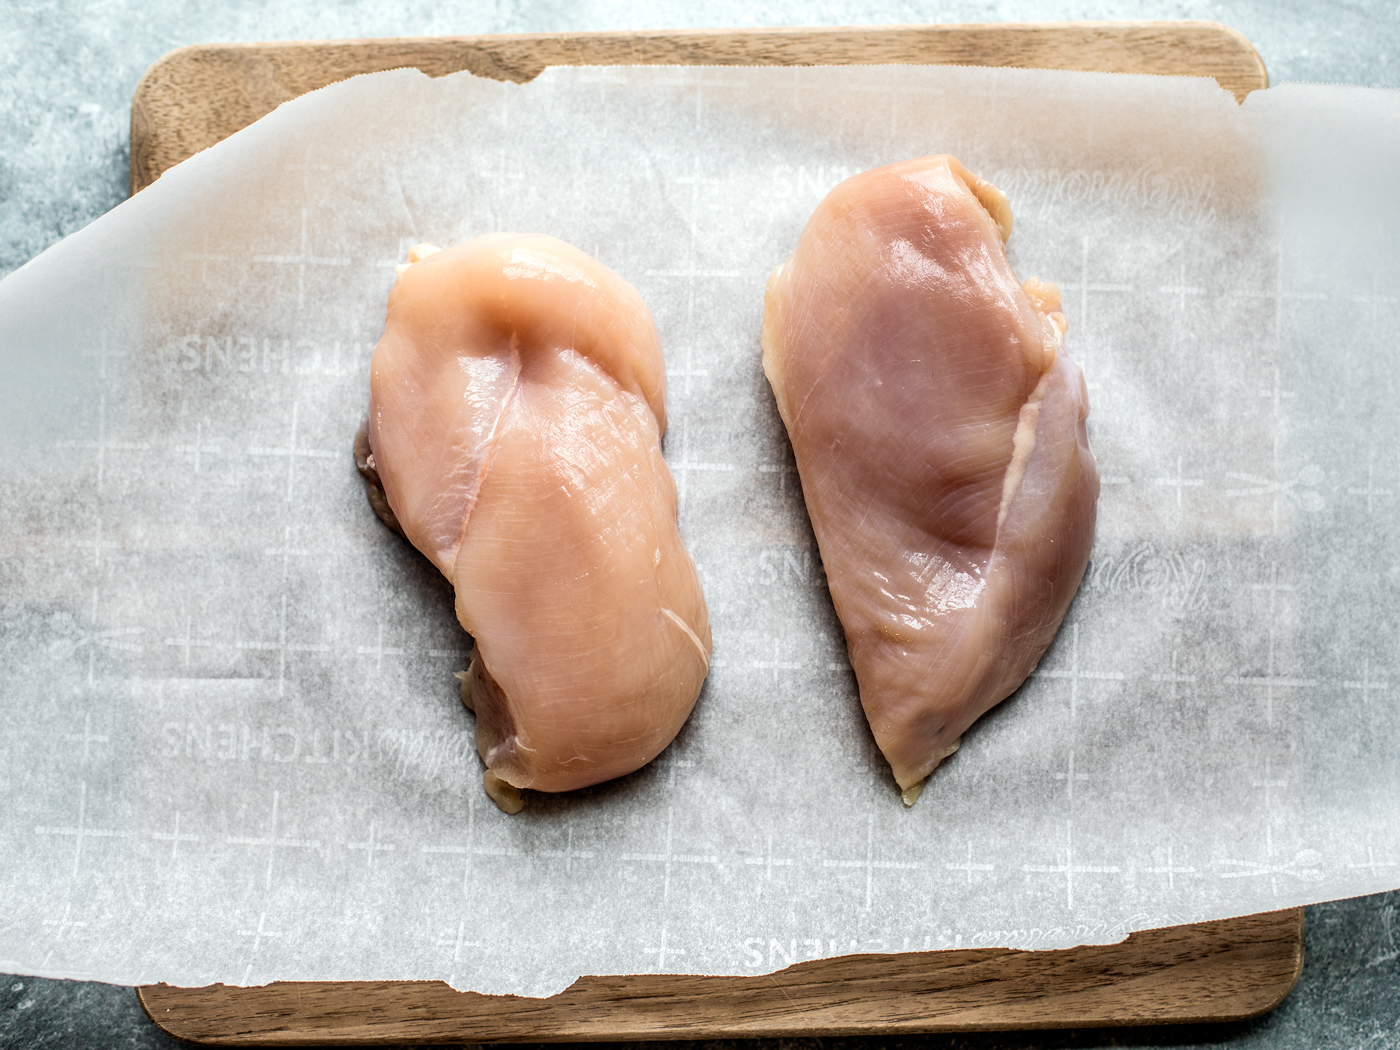 Two raw chicken breasts on parchment-lined cutting board.